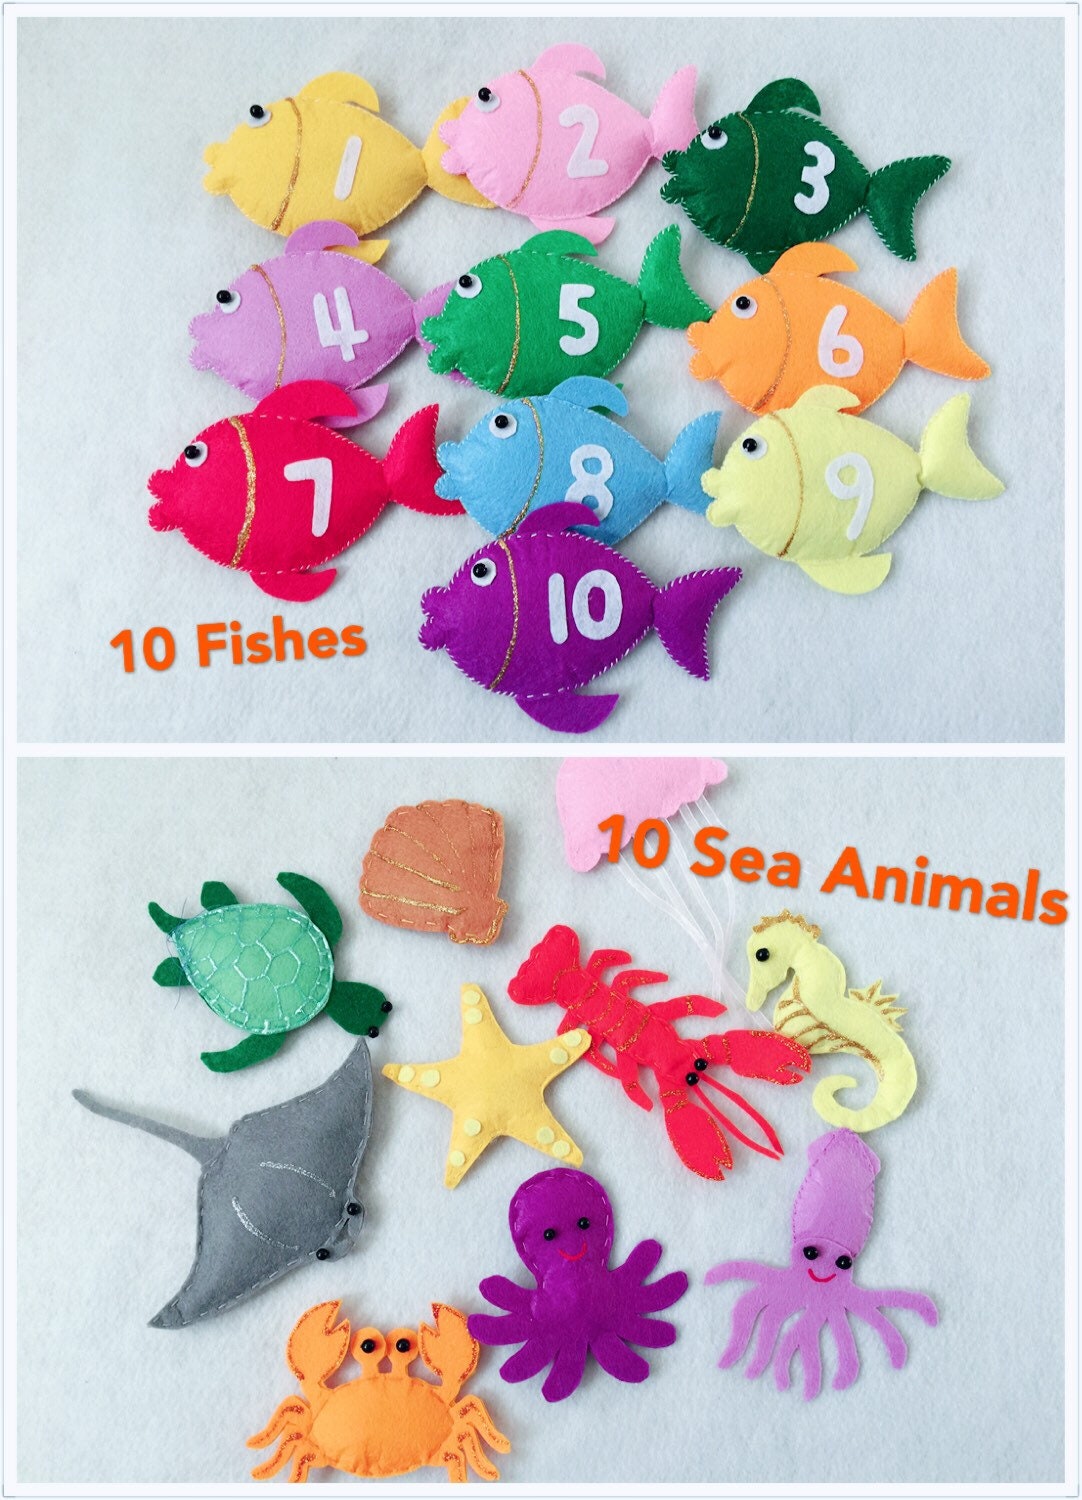 Magnetic Fishing Game/felt Sea Animals With Fishing Rob/sensory Toy Felt  Toddler Activity/educational Toy/felt Sea Creatures/gift for Kids 